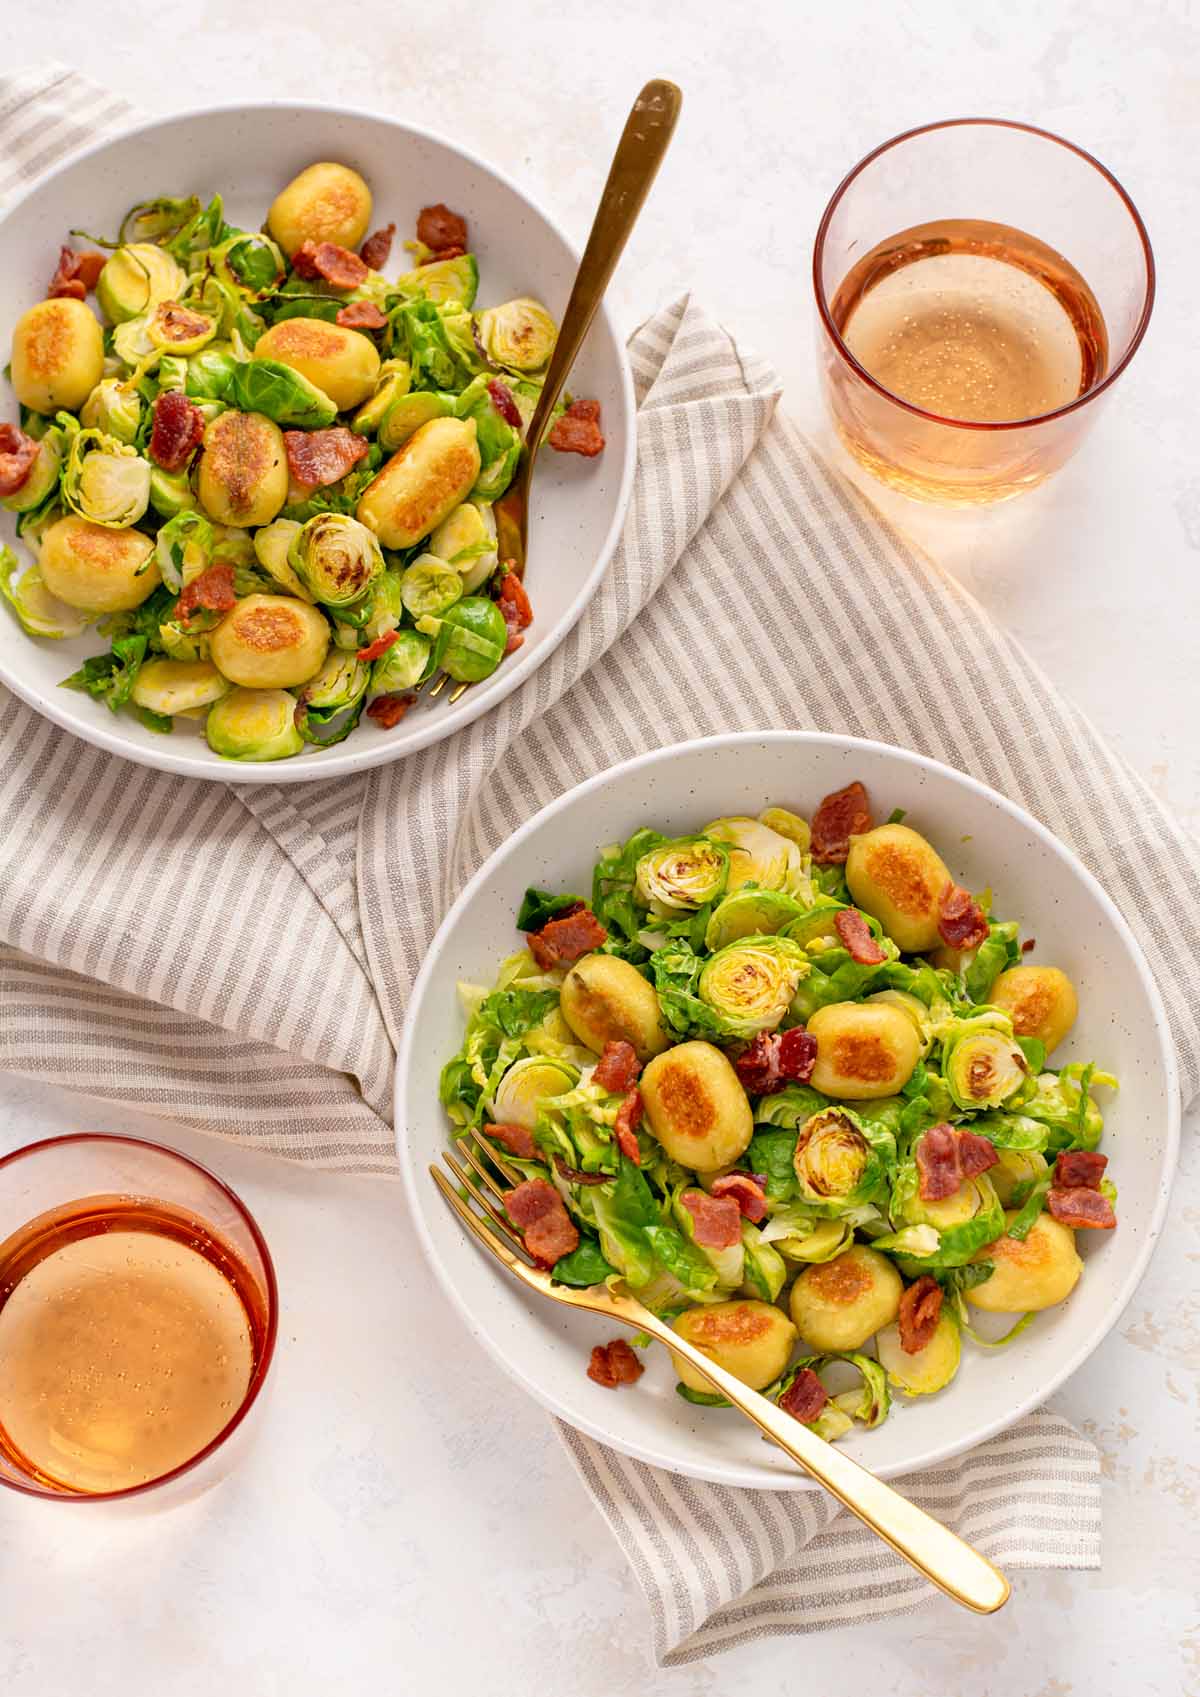 Overhead shot of two plates of sautéed Brussels sprouts and crispy gnocchi and bacon. Two small cups of ginger ale beside the plates.